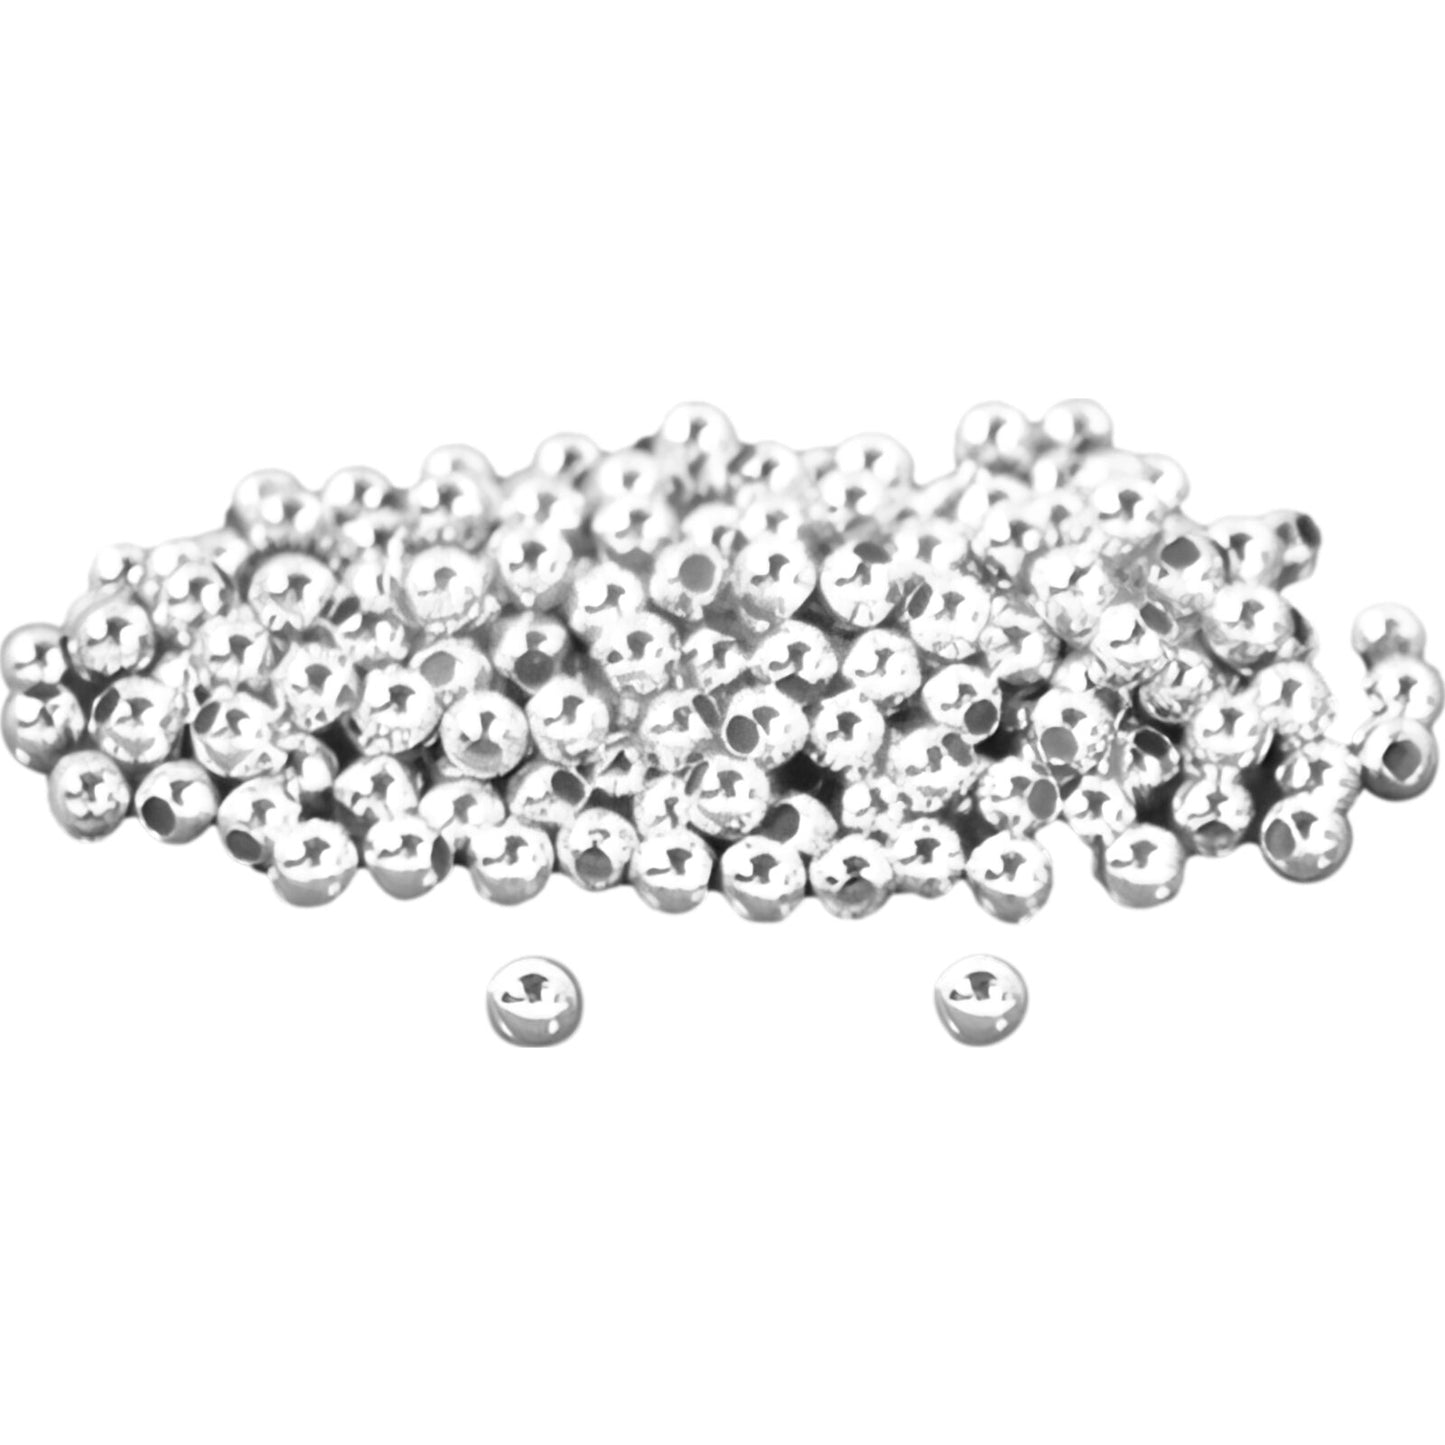 200 Polished Sterling Silver Ball Beads Jewelry Beading Making 2mm